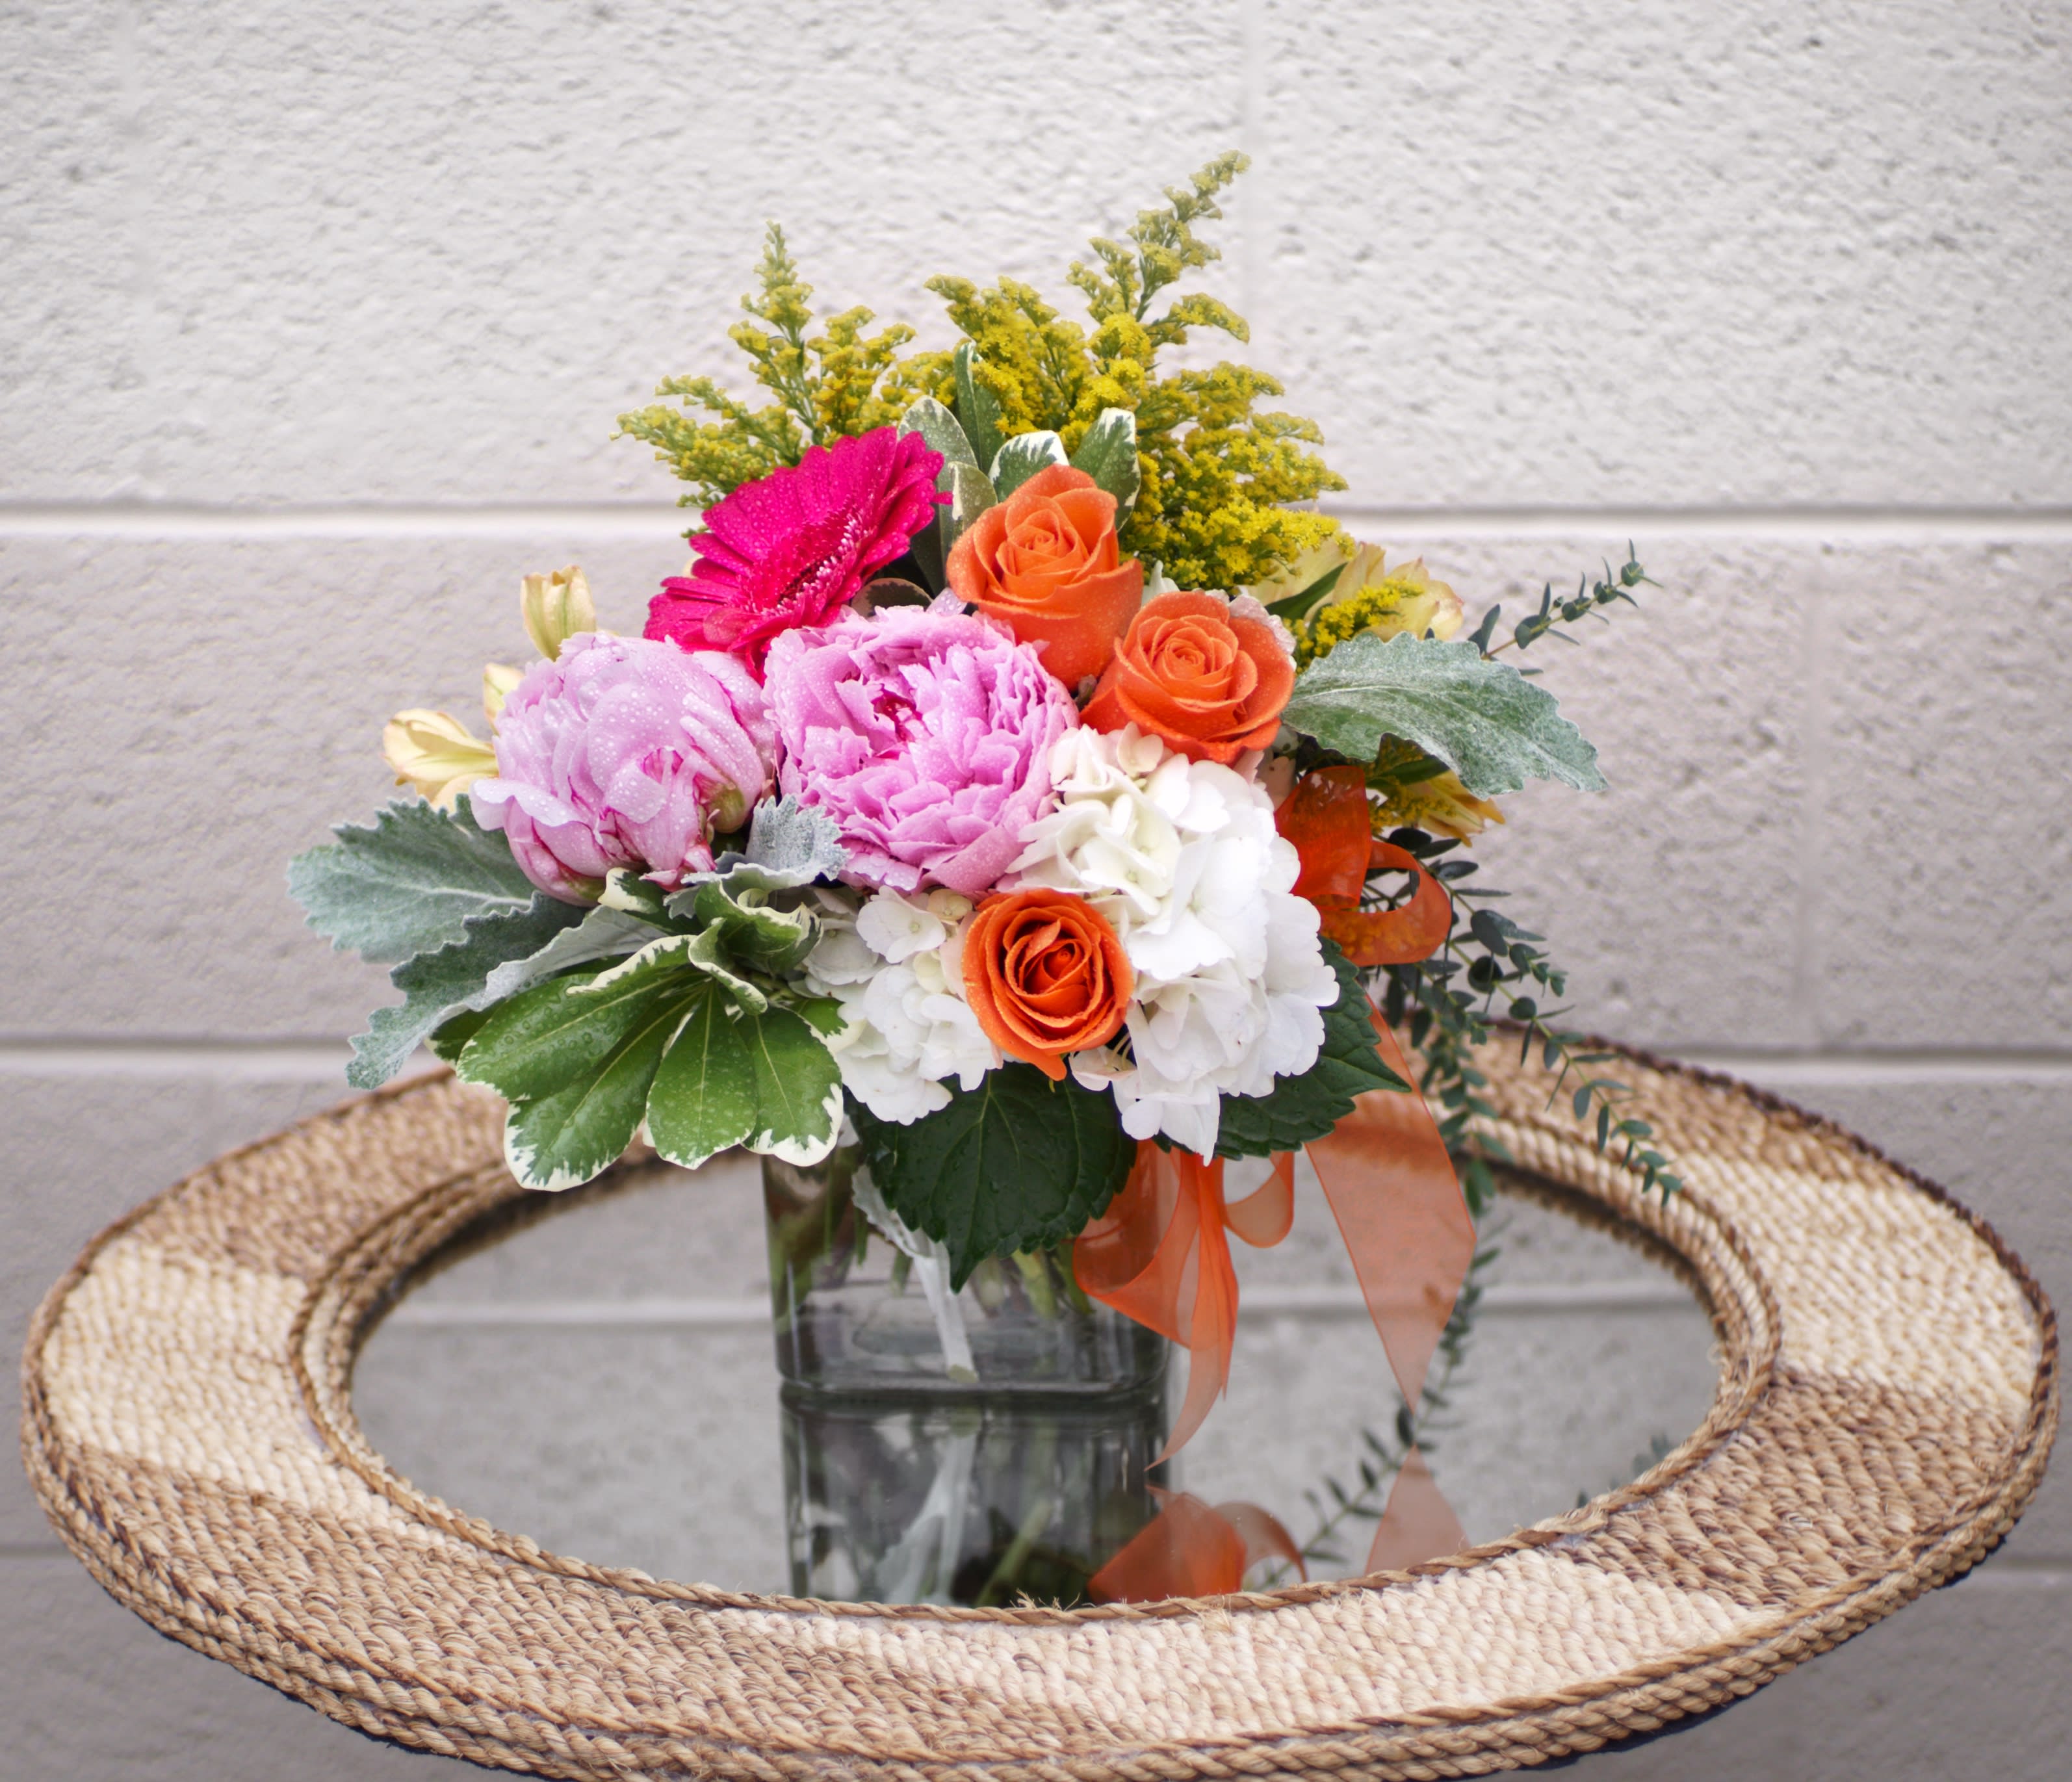 Summer Scent - Pretty design including all premium flowers: rose, gerbera, hydrangea... and accents. STANDARD: FIRST PHOTO DELUXE: SECOND PHOTO PREMIUM: THIRD PHOTO